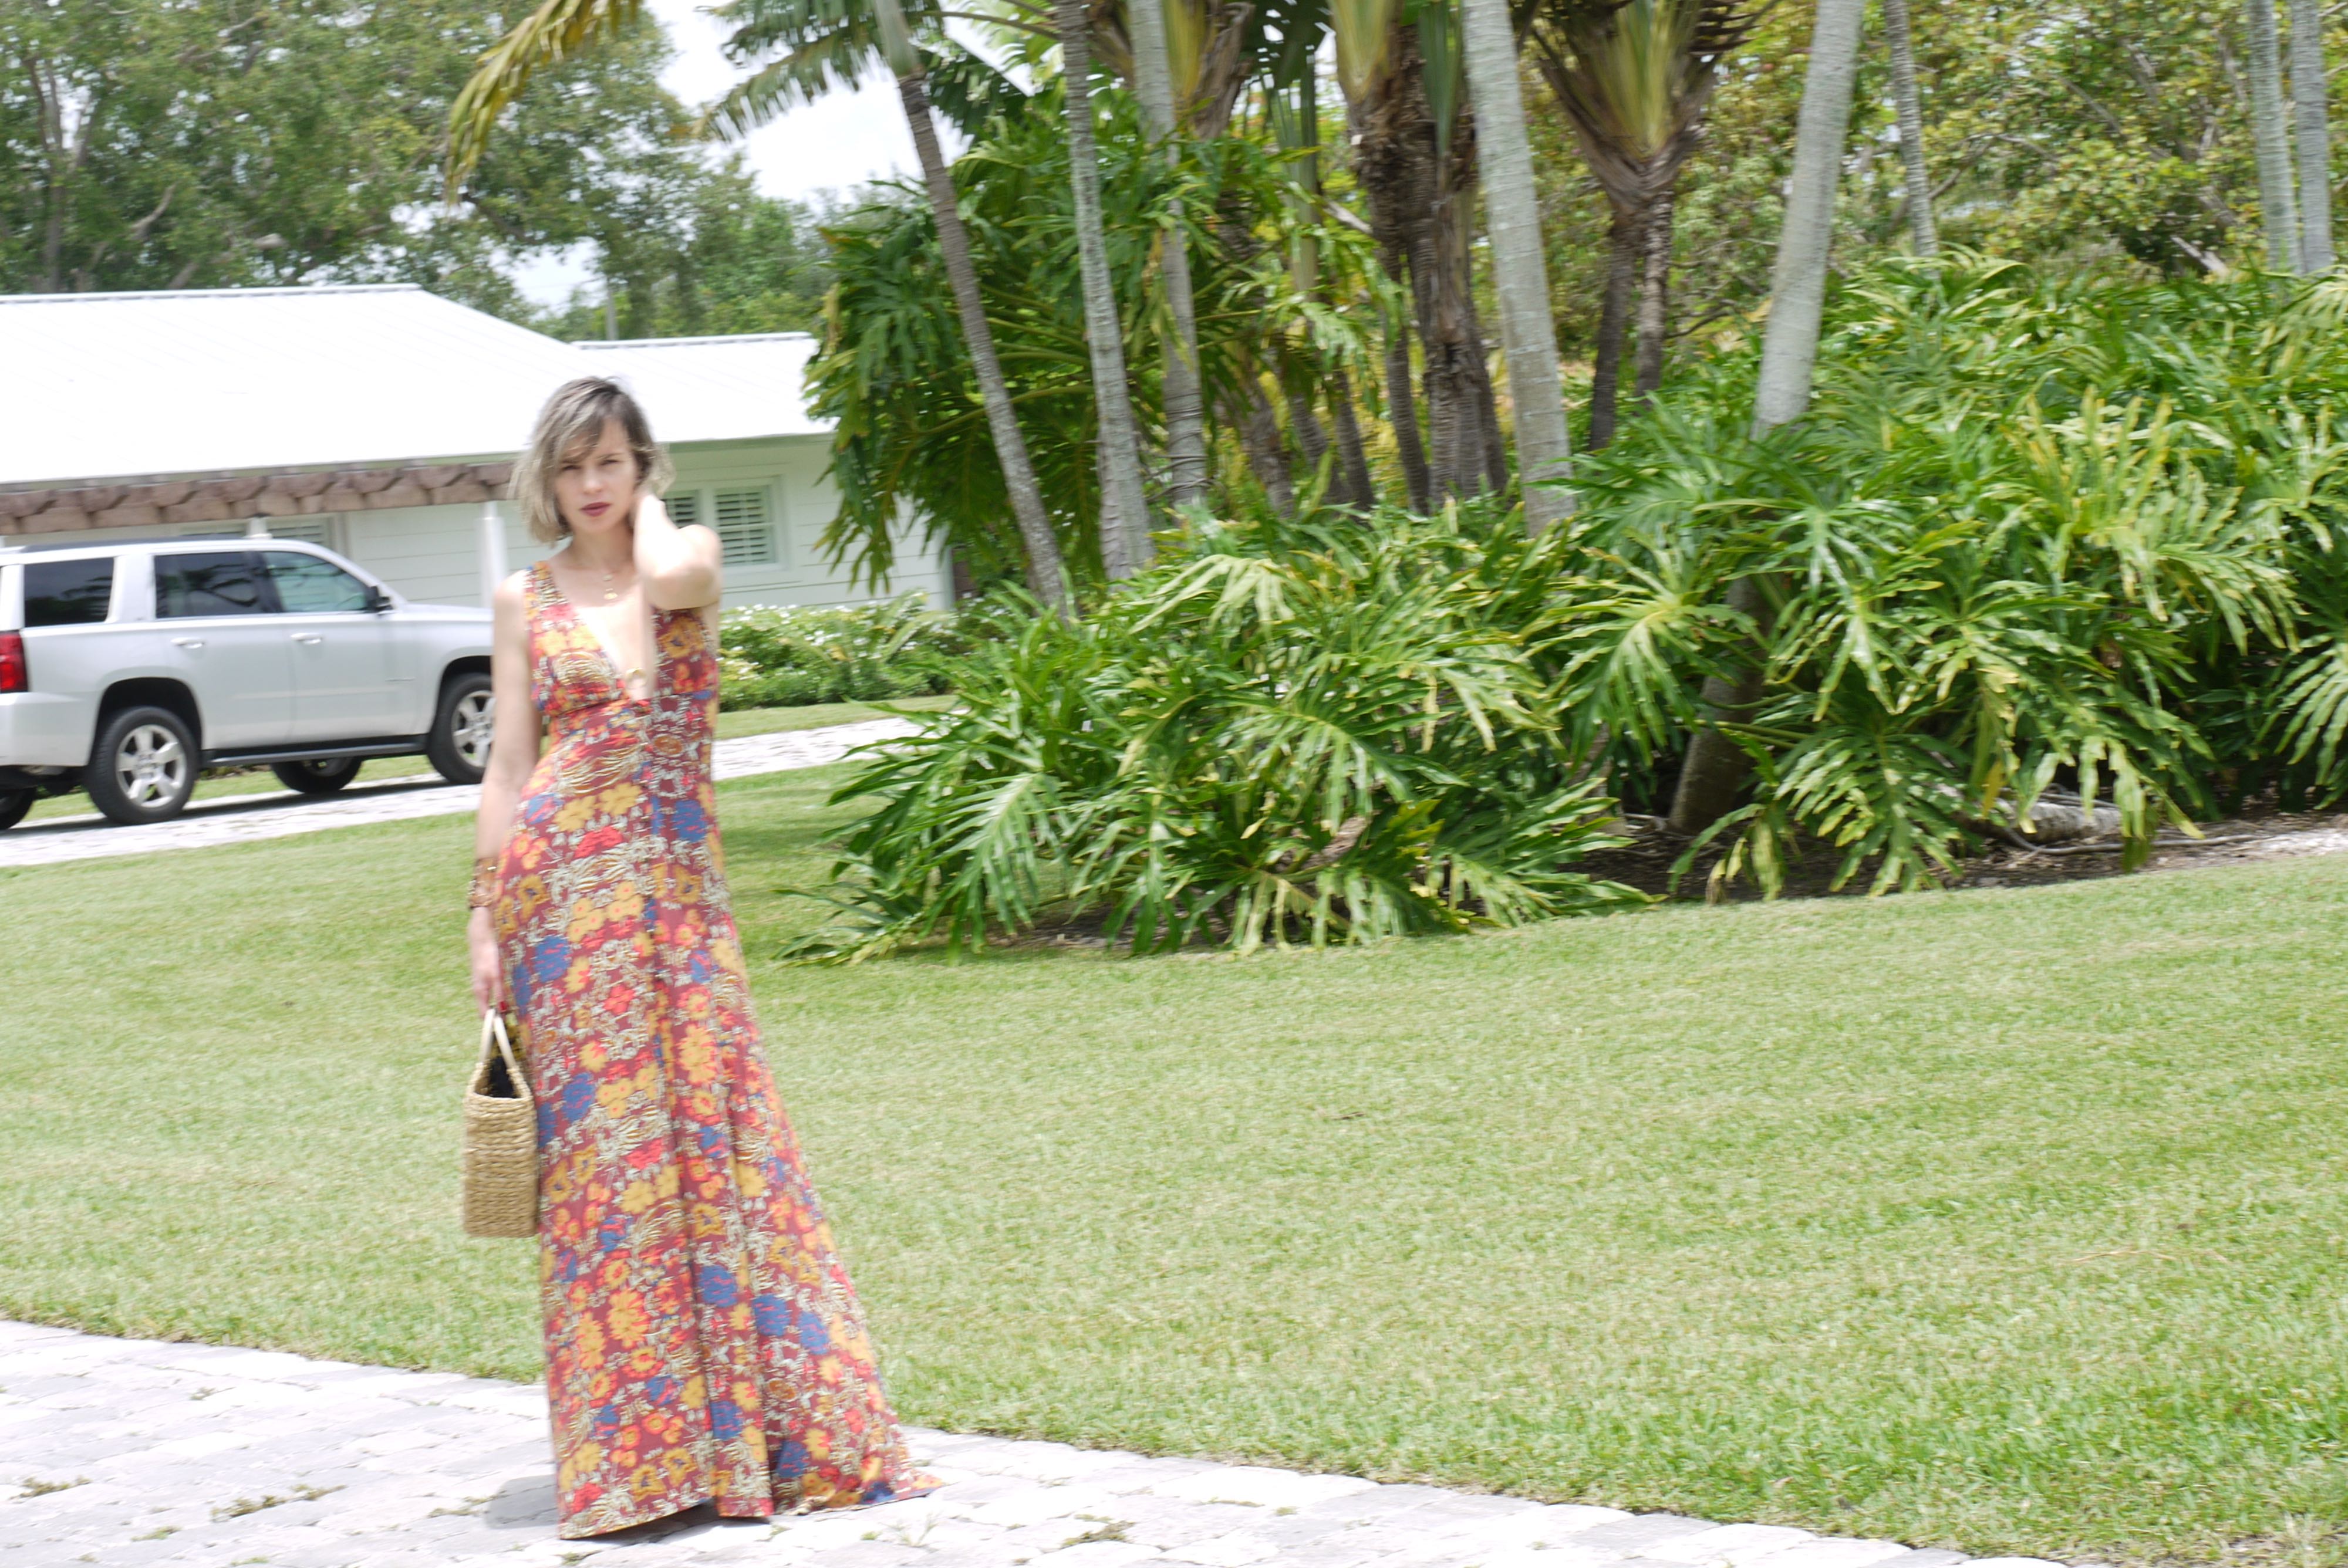 Alba Marina blogger from My lovely people blog is sharing with all of you a love story from her homeland Cuba, wearing a maxi dress from Free People